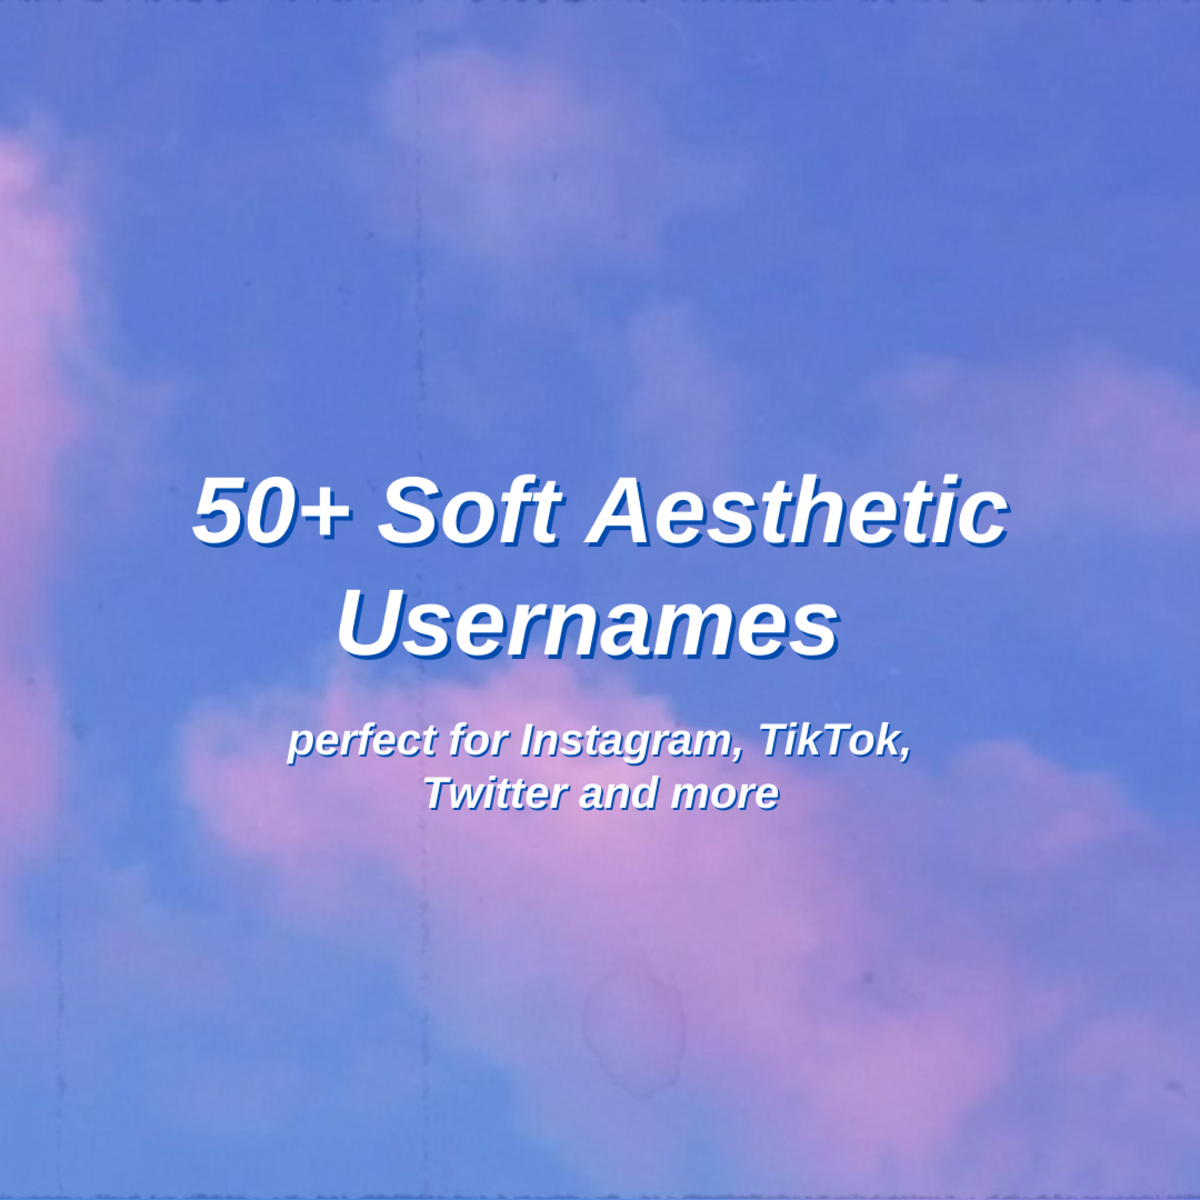 50+ Soft Aesthetic Usernames: The Ultimate List